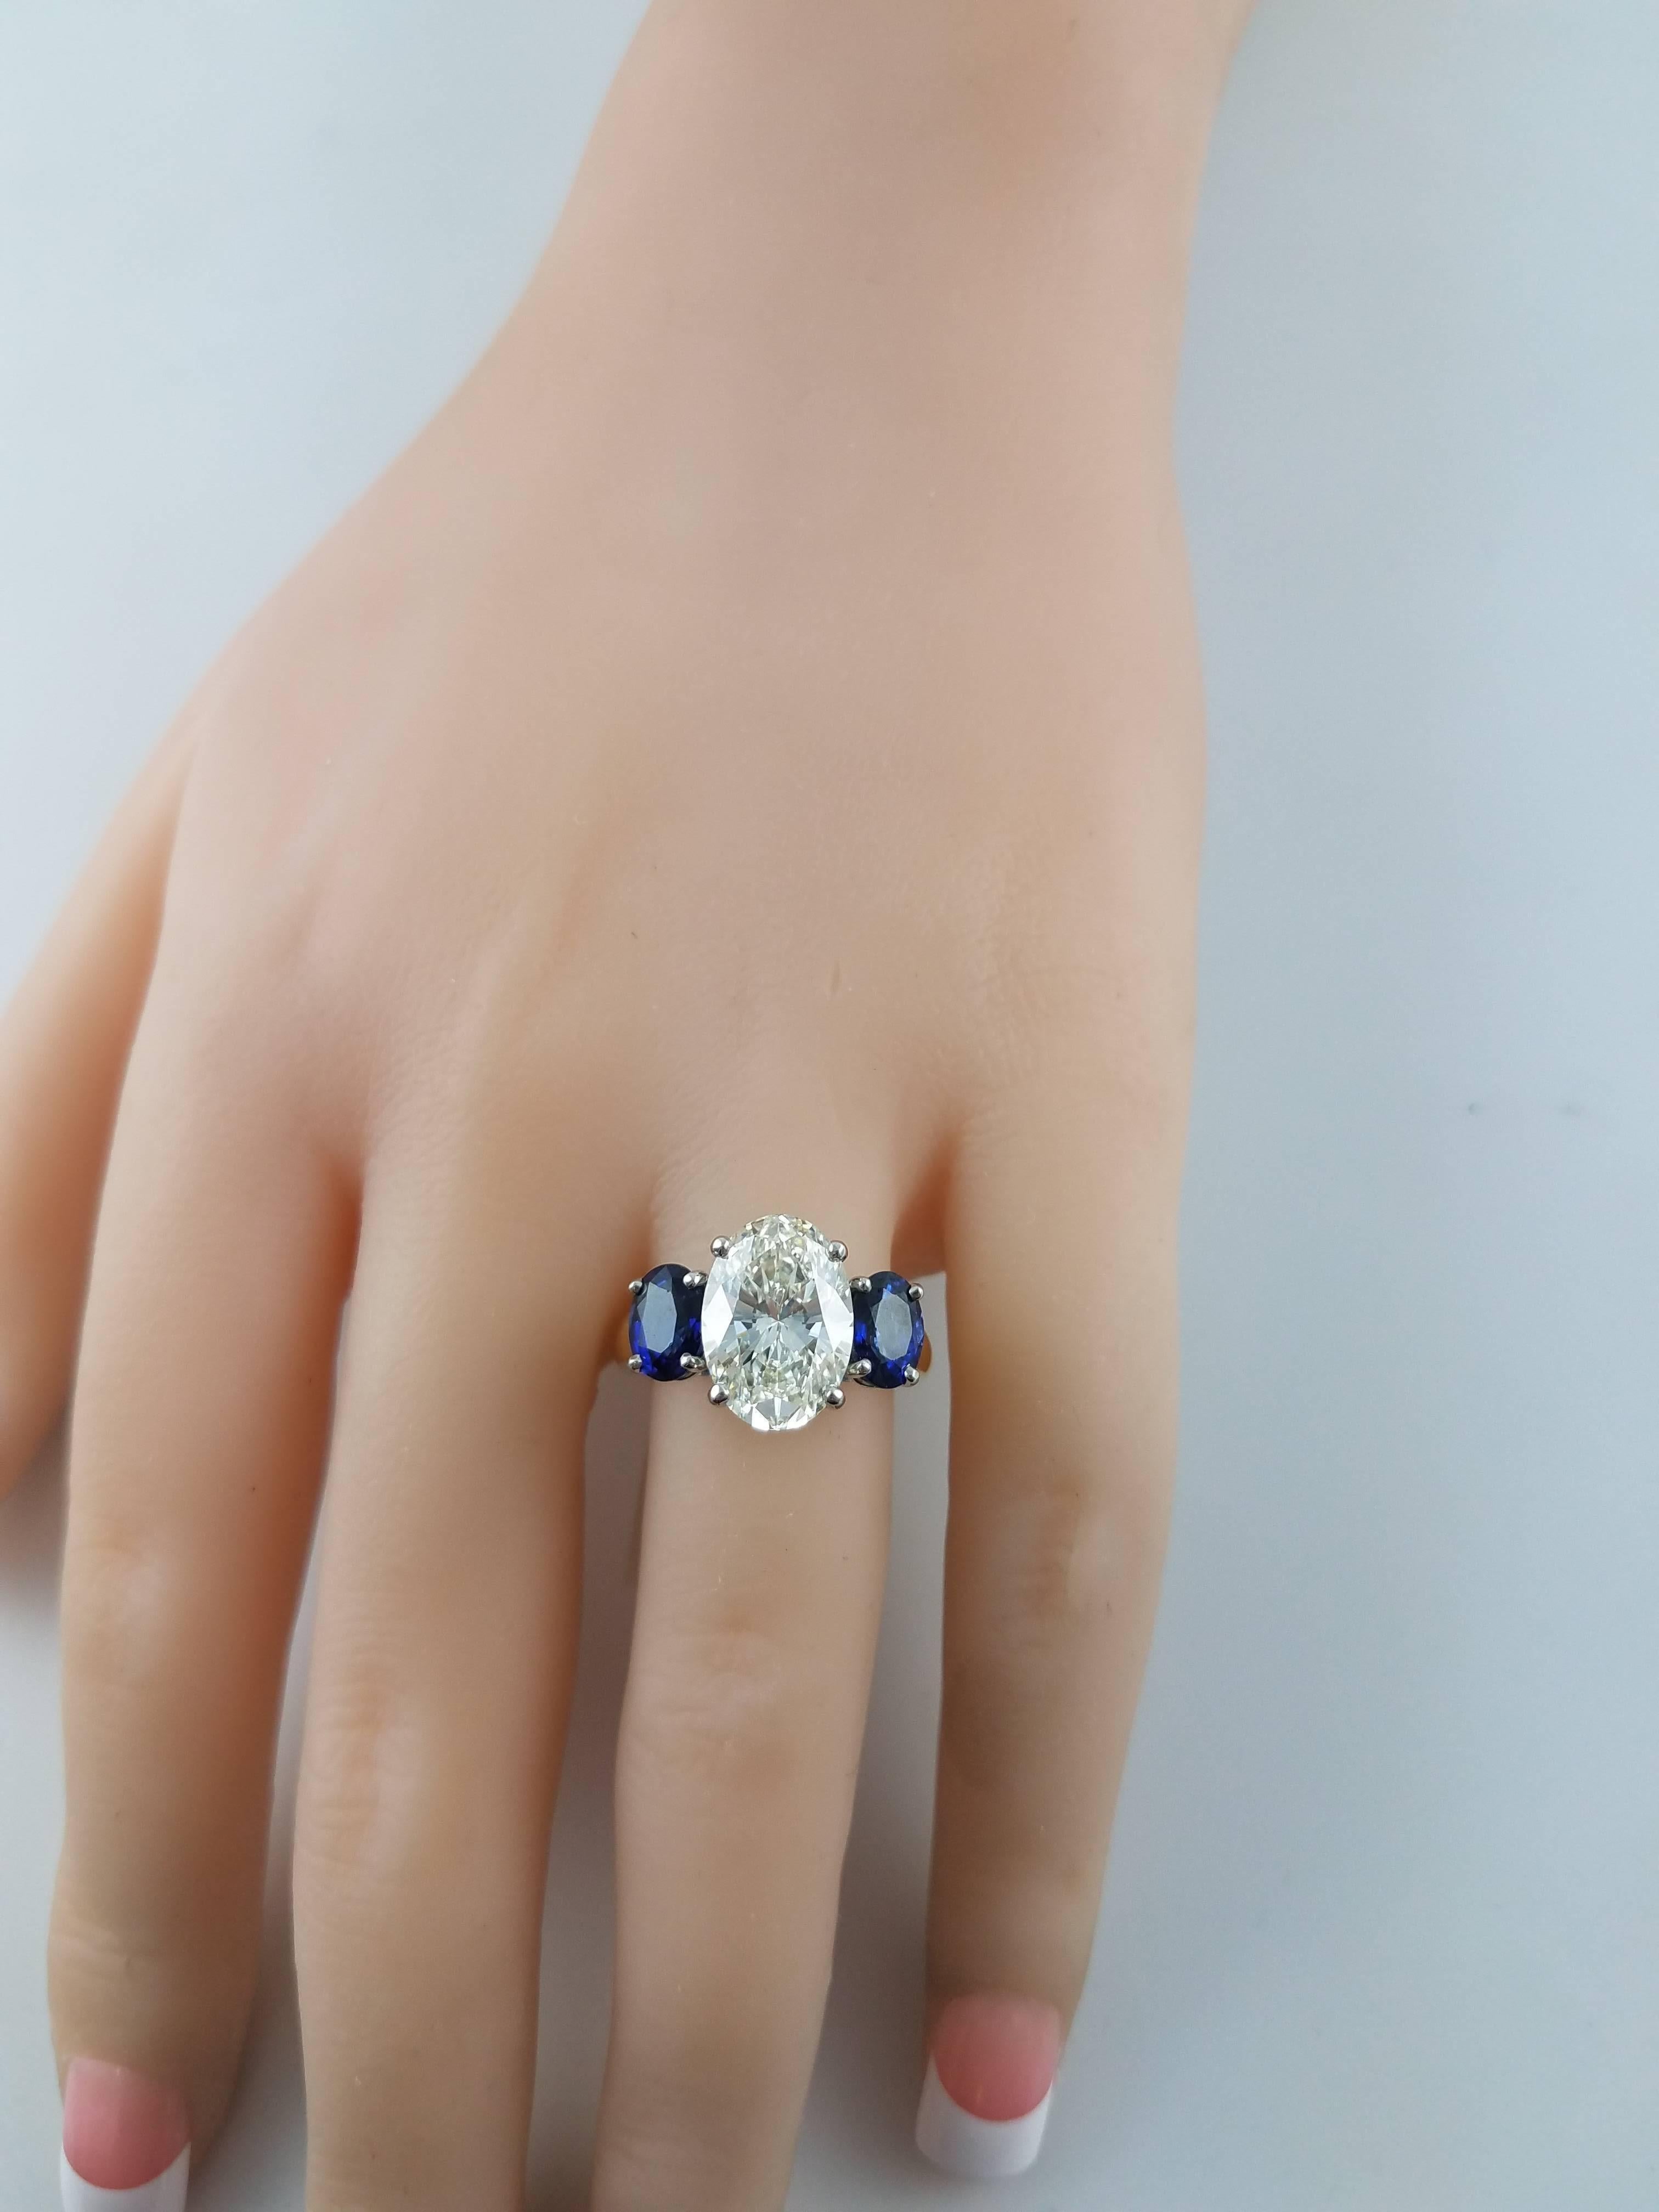 An engagement ring like no other. Showcasing a sparkling oval cut diamond center stone weighing 3.69 carats. Flanking the center are two vibrant blue sapphires each set in a platinum basket. Weight of the sapphires 2.08 carats total. The rounded